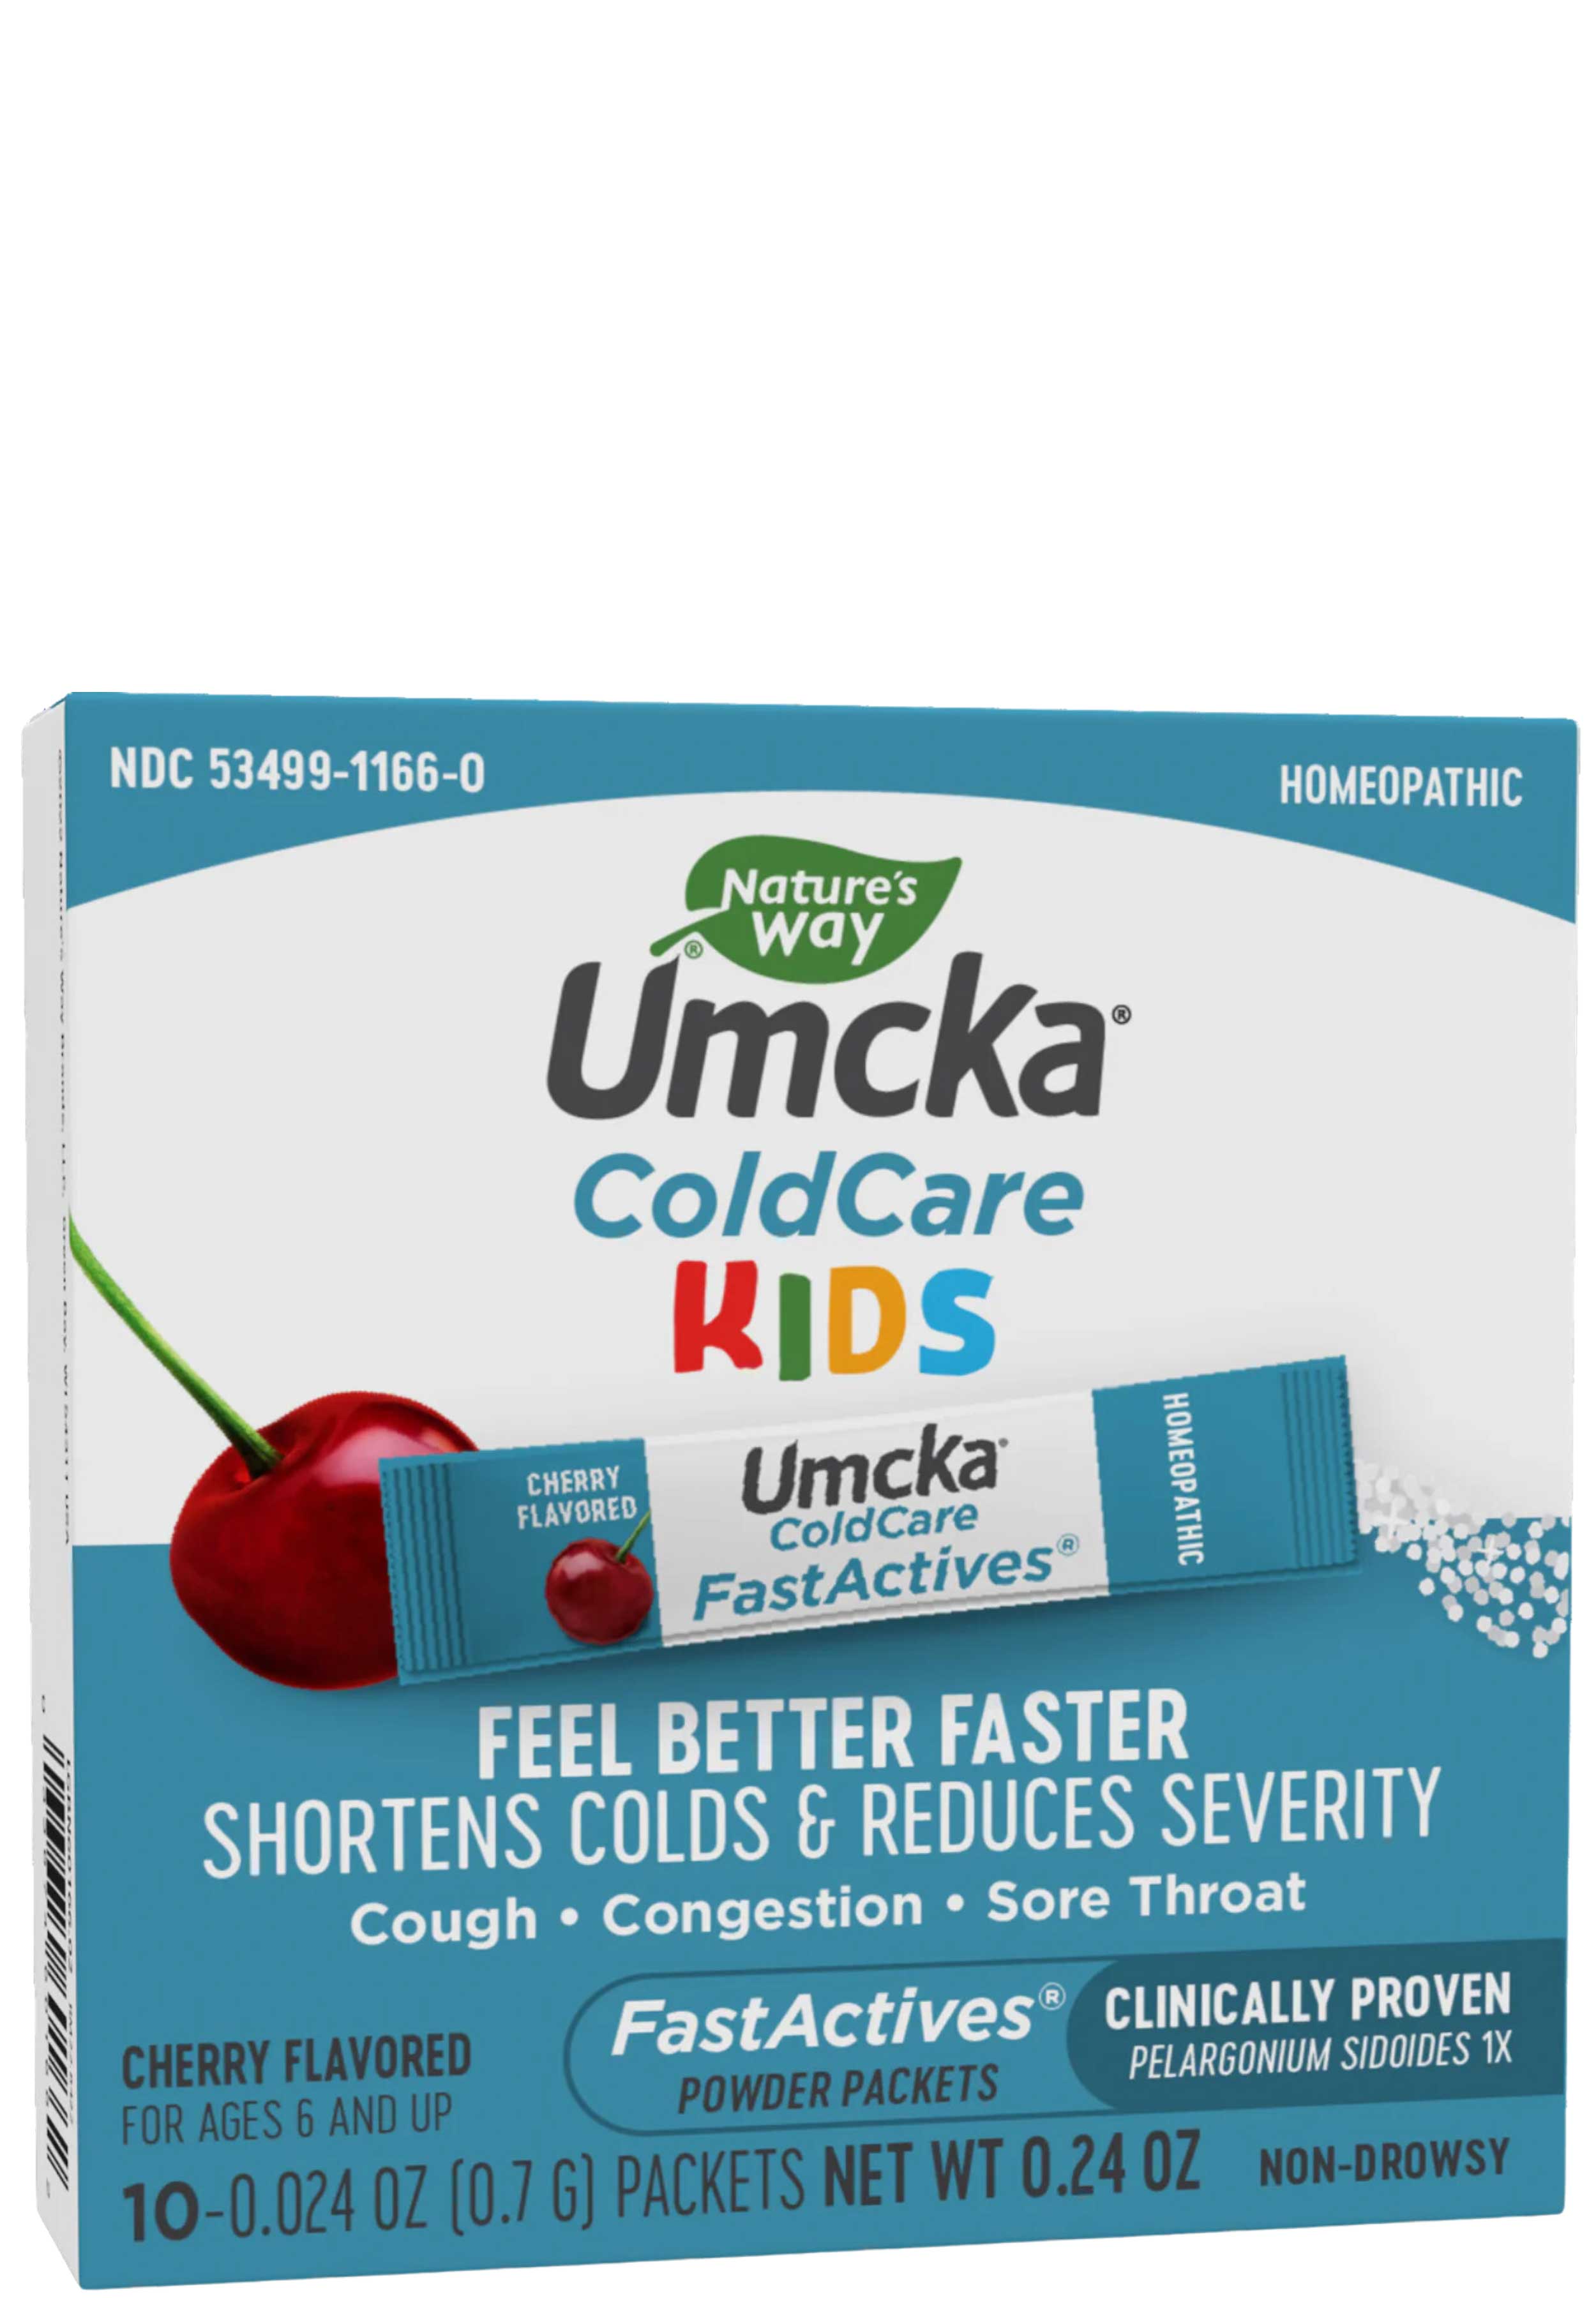 Nature's Way Umcka ColdCare Kids FastActives (Cherry)